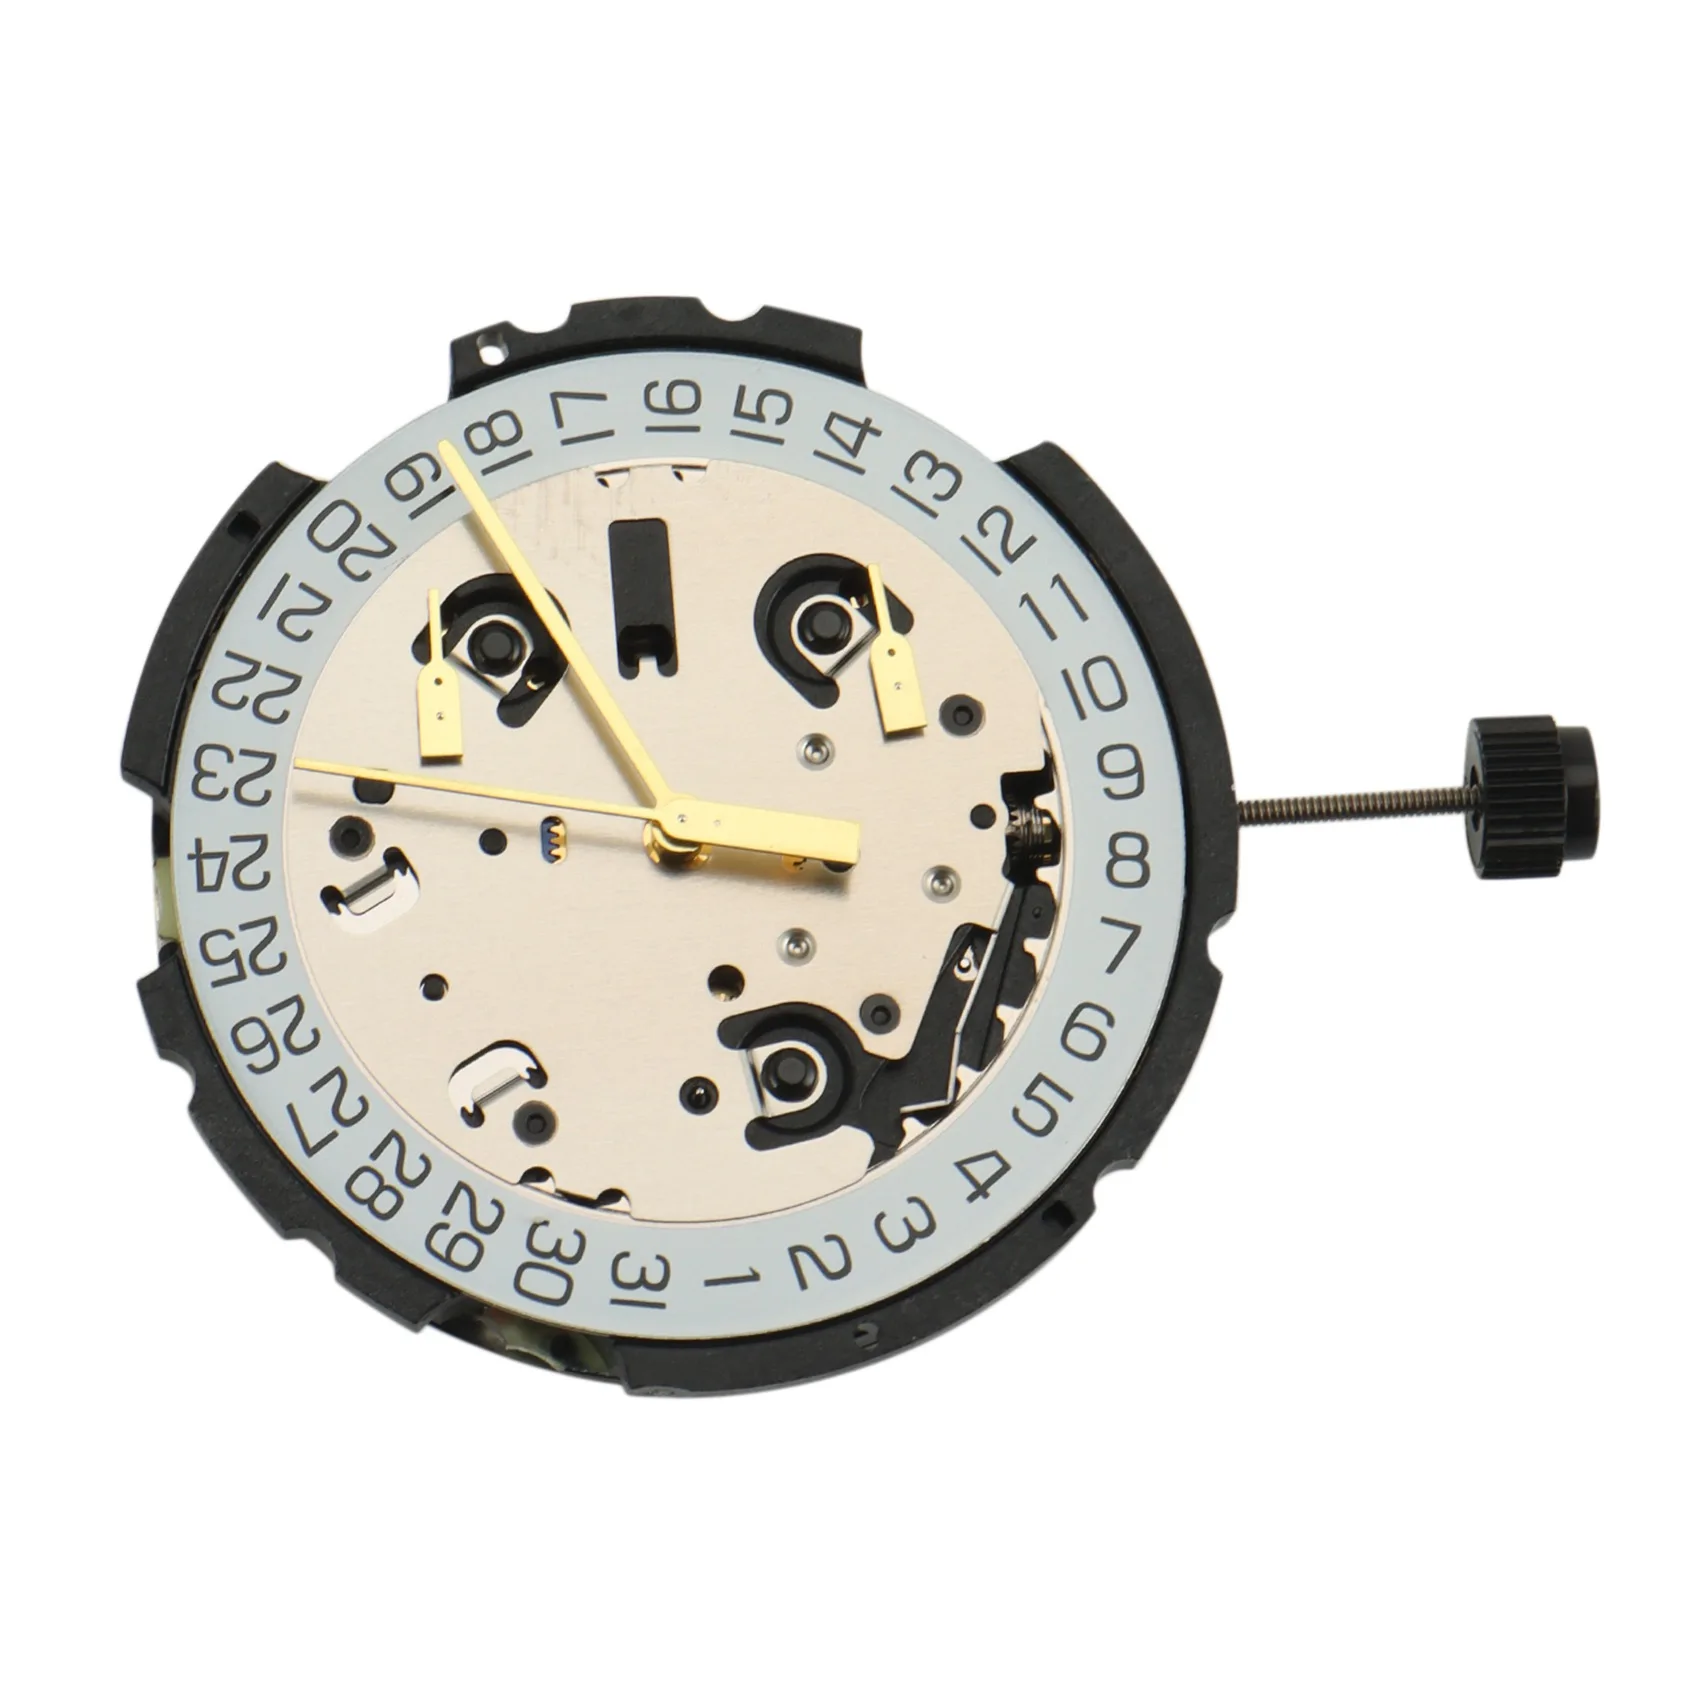 watch-movement-for-eta-g10212-quartz-movement-with-stem-no-battery-6-pin-date-at-4-watch-repair-parts-replace-g10211